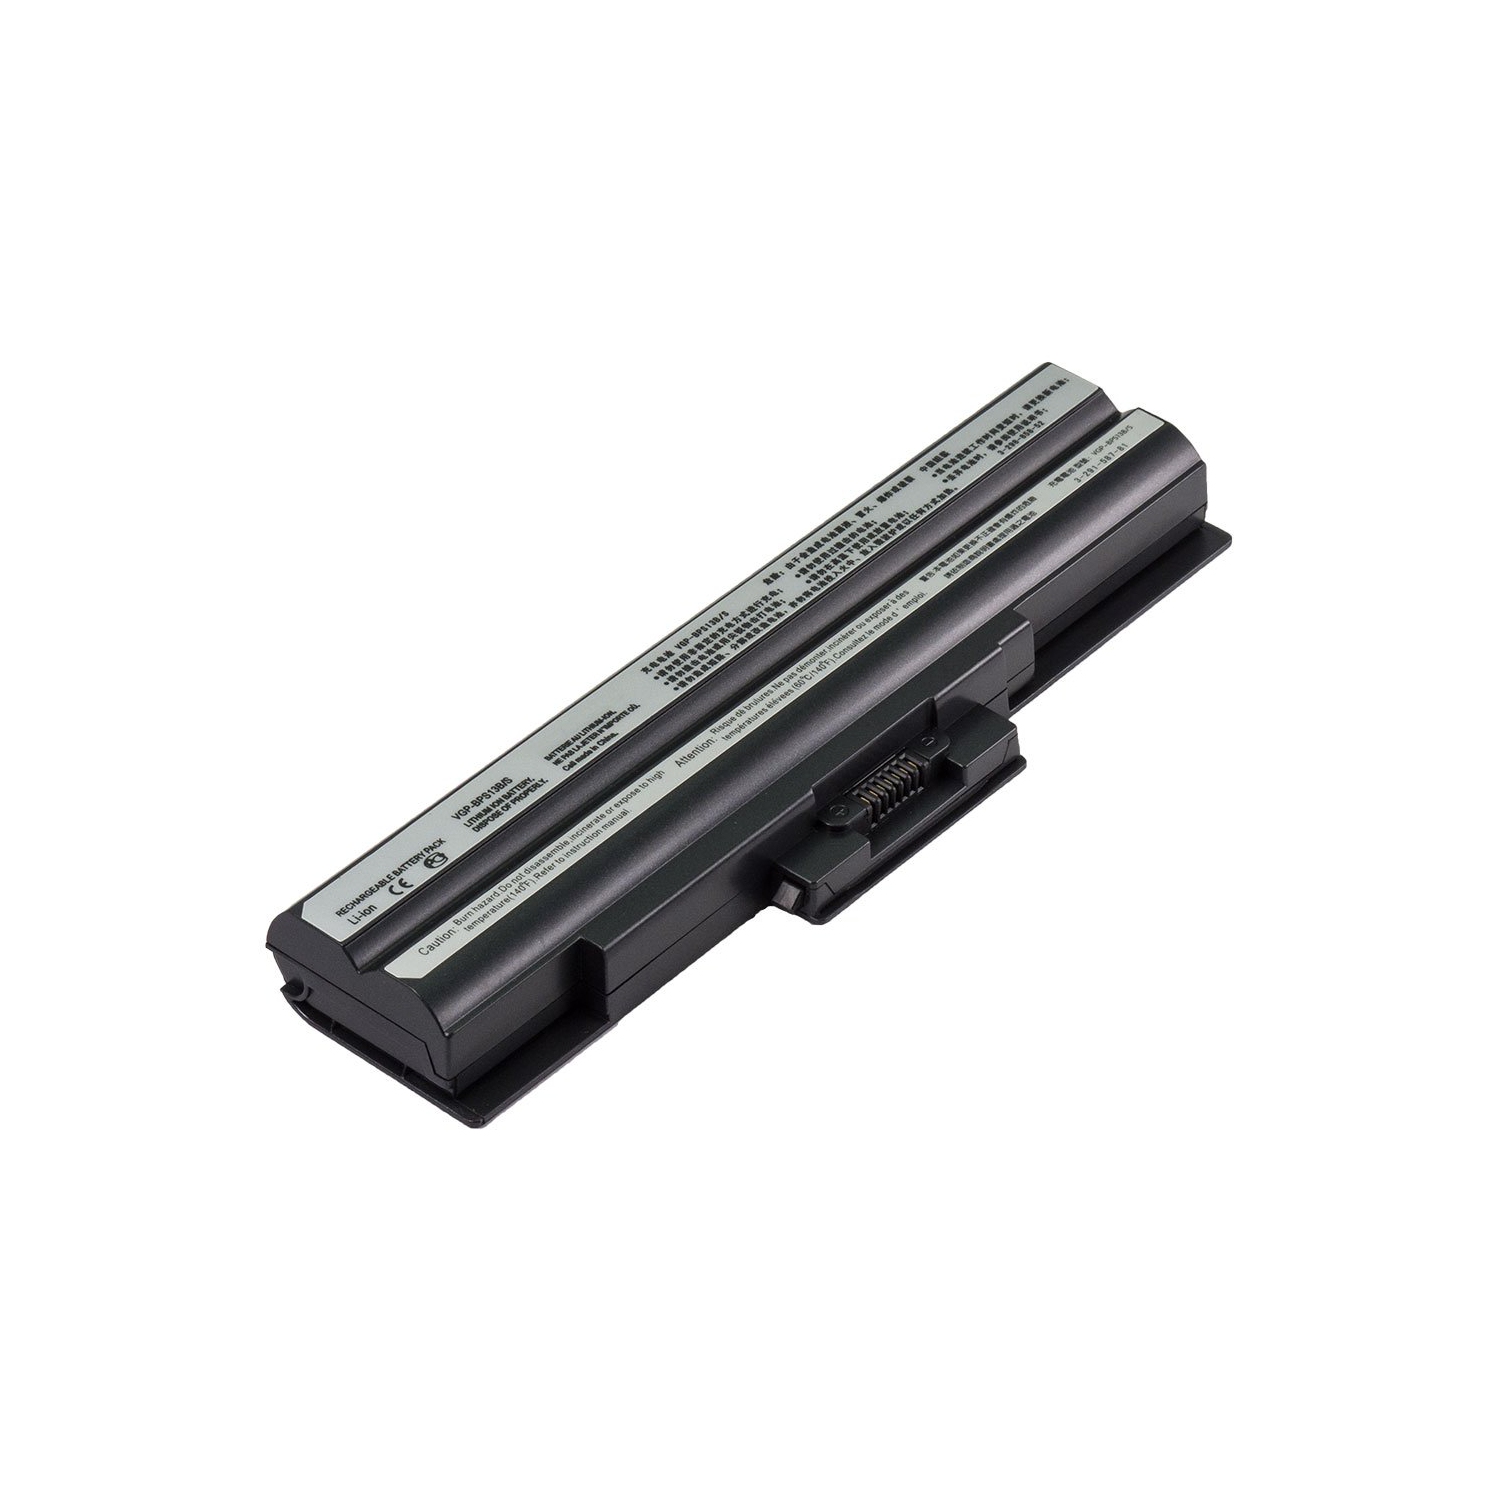 Laptop Battery Replacement for Sony VAIO VGN-FW140E/W, VGP-BPS13, VGP-BPS13/S, VGP-BPS13A/Q, VGP-BPS13B/B, VGP-BSP13/S